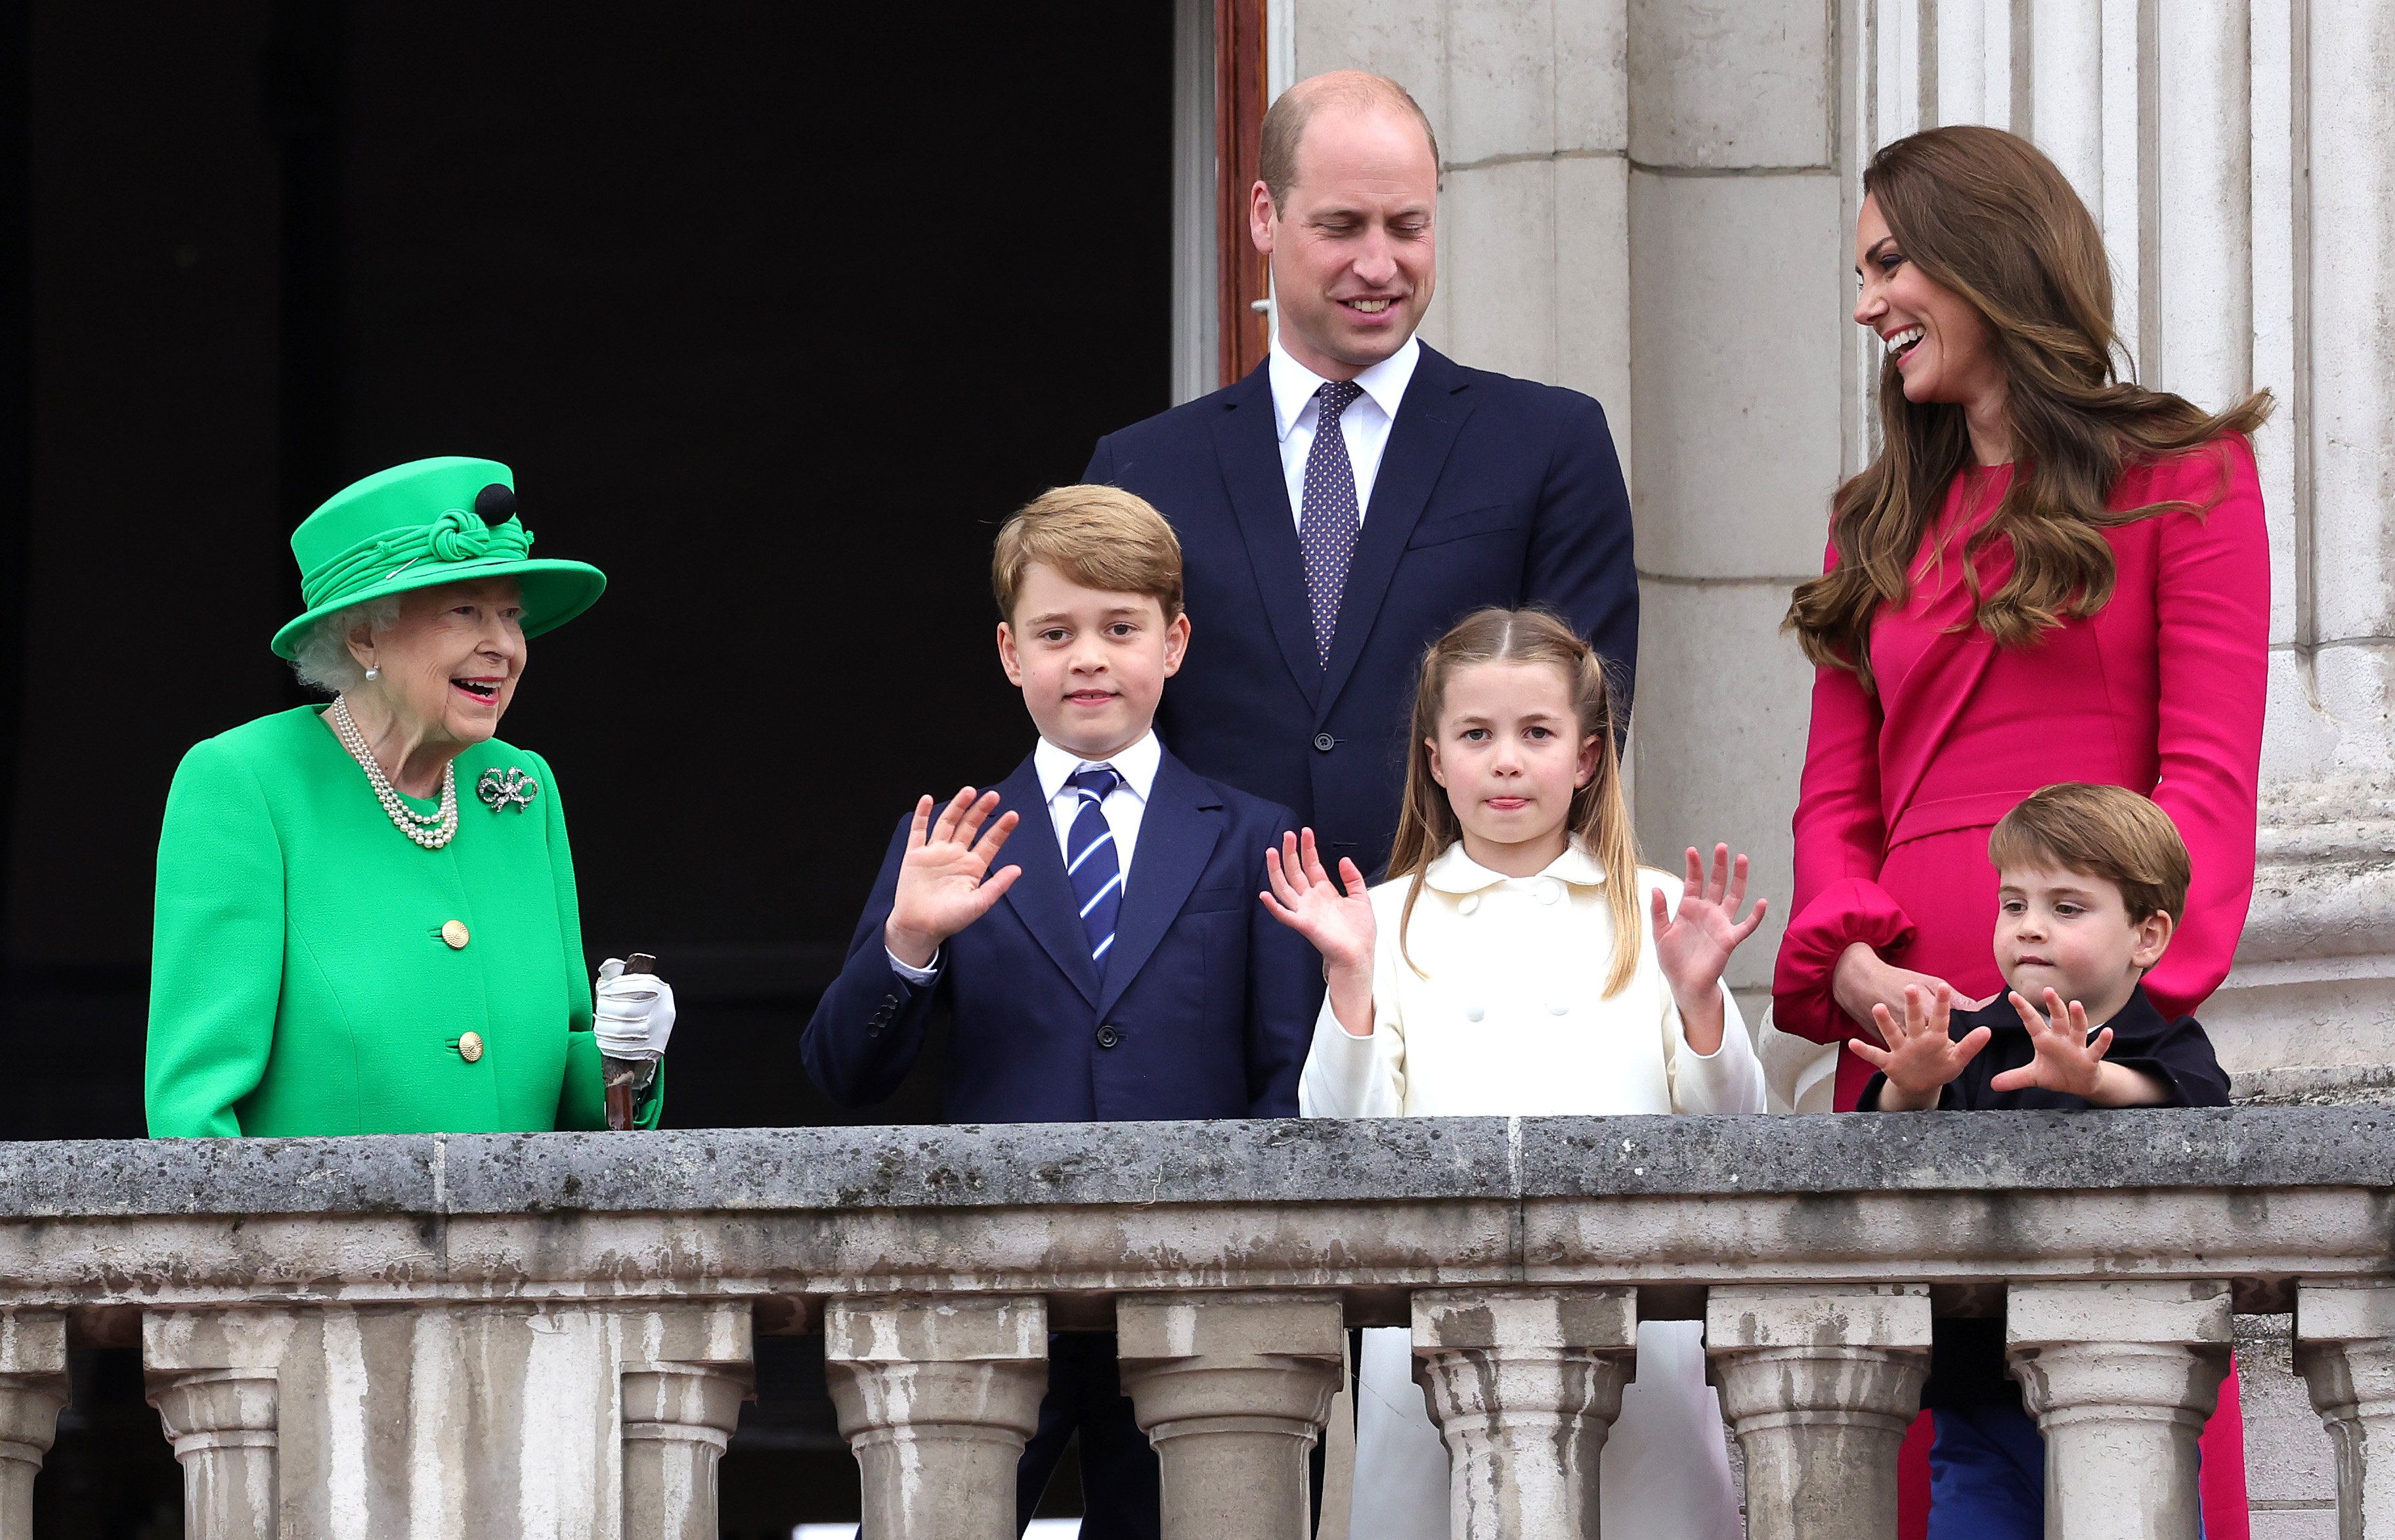  Queen Elizabeth II, Prince George of Cambridge, Prince William, Duke of Cambridge, Princess Charlotte of Cambridge, Catherine, Duchess of Cambridge and Prince Louis of Cambridge on the balcony of Buckingham Palace during the Platinum Jubilee Pageant on June 05, 2022 in London, England | Source: Getty Images